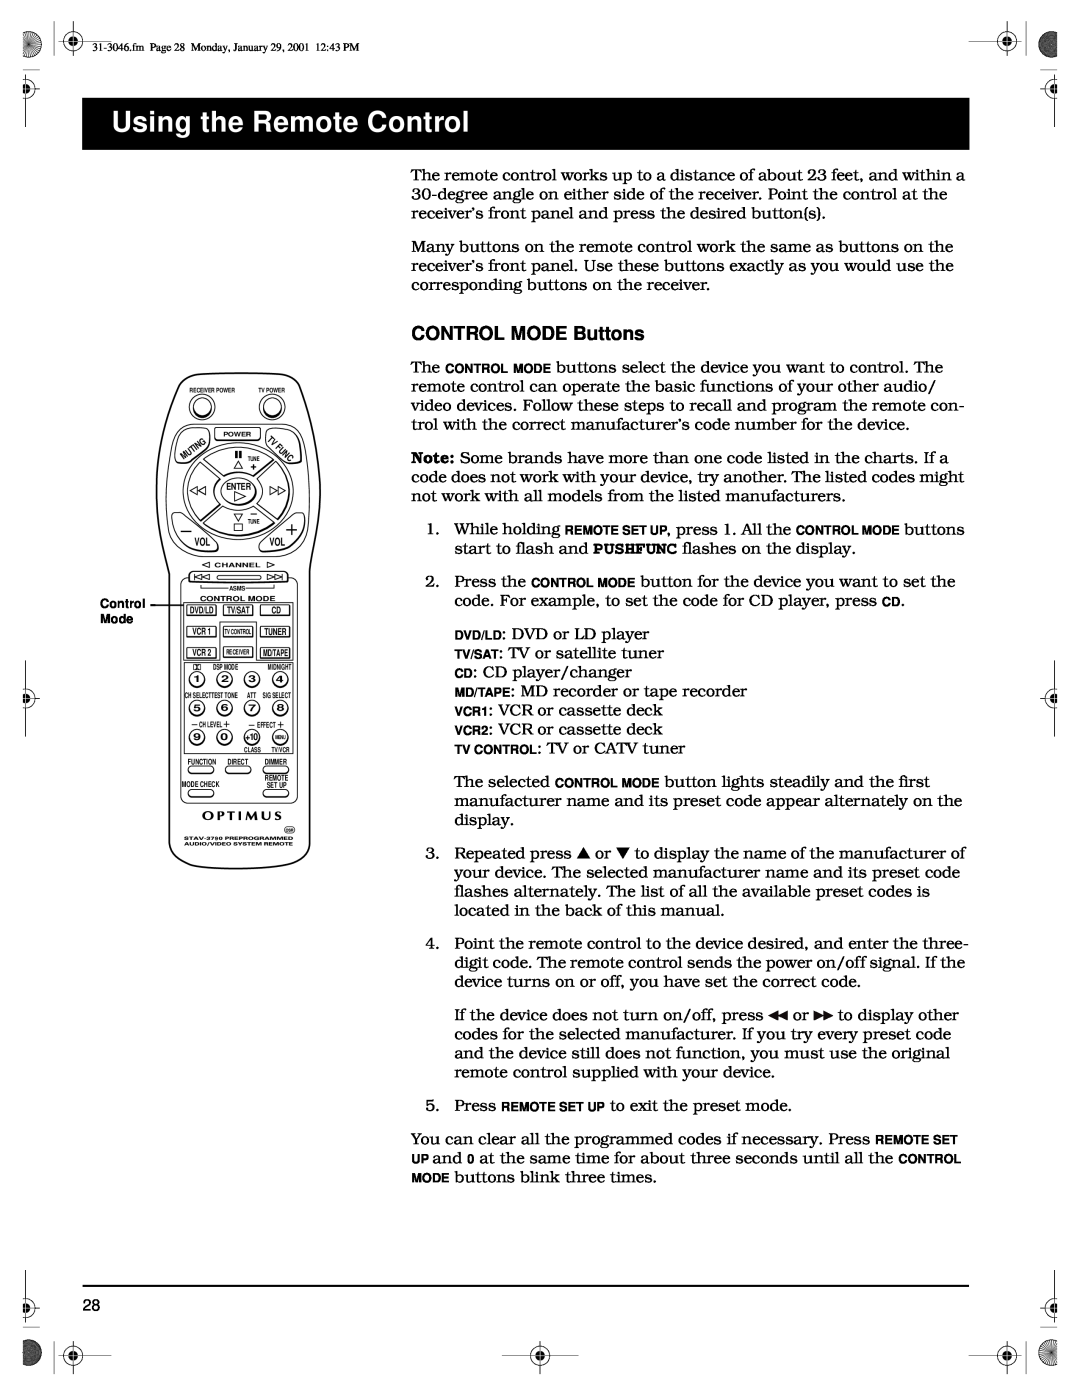 Optimus STAV-3790 owner manual Using the Remote Control, CONTROL MODE Buttons 